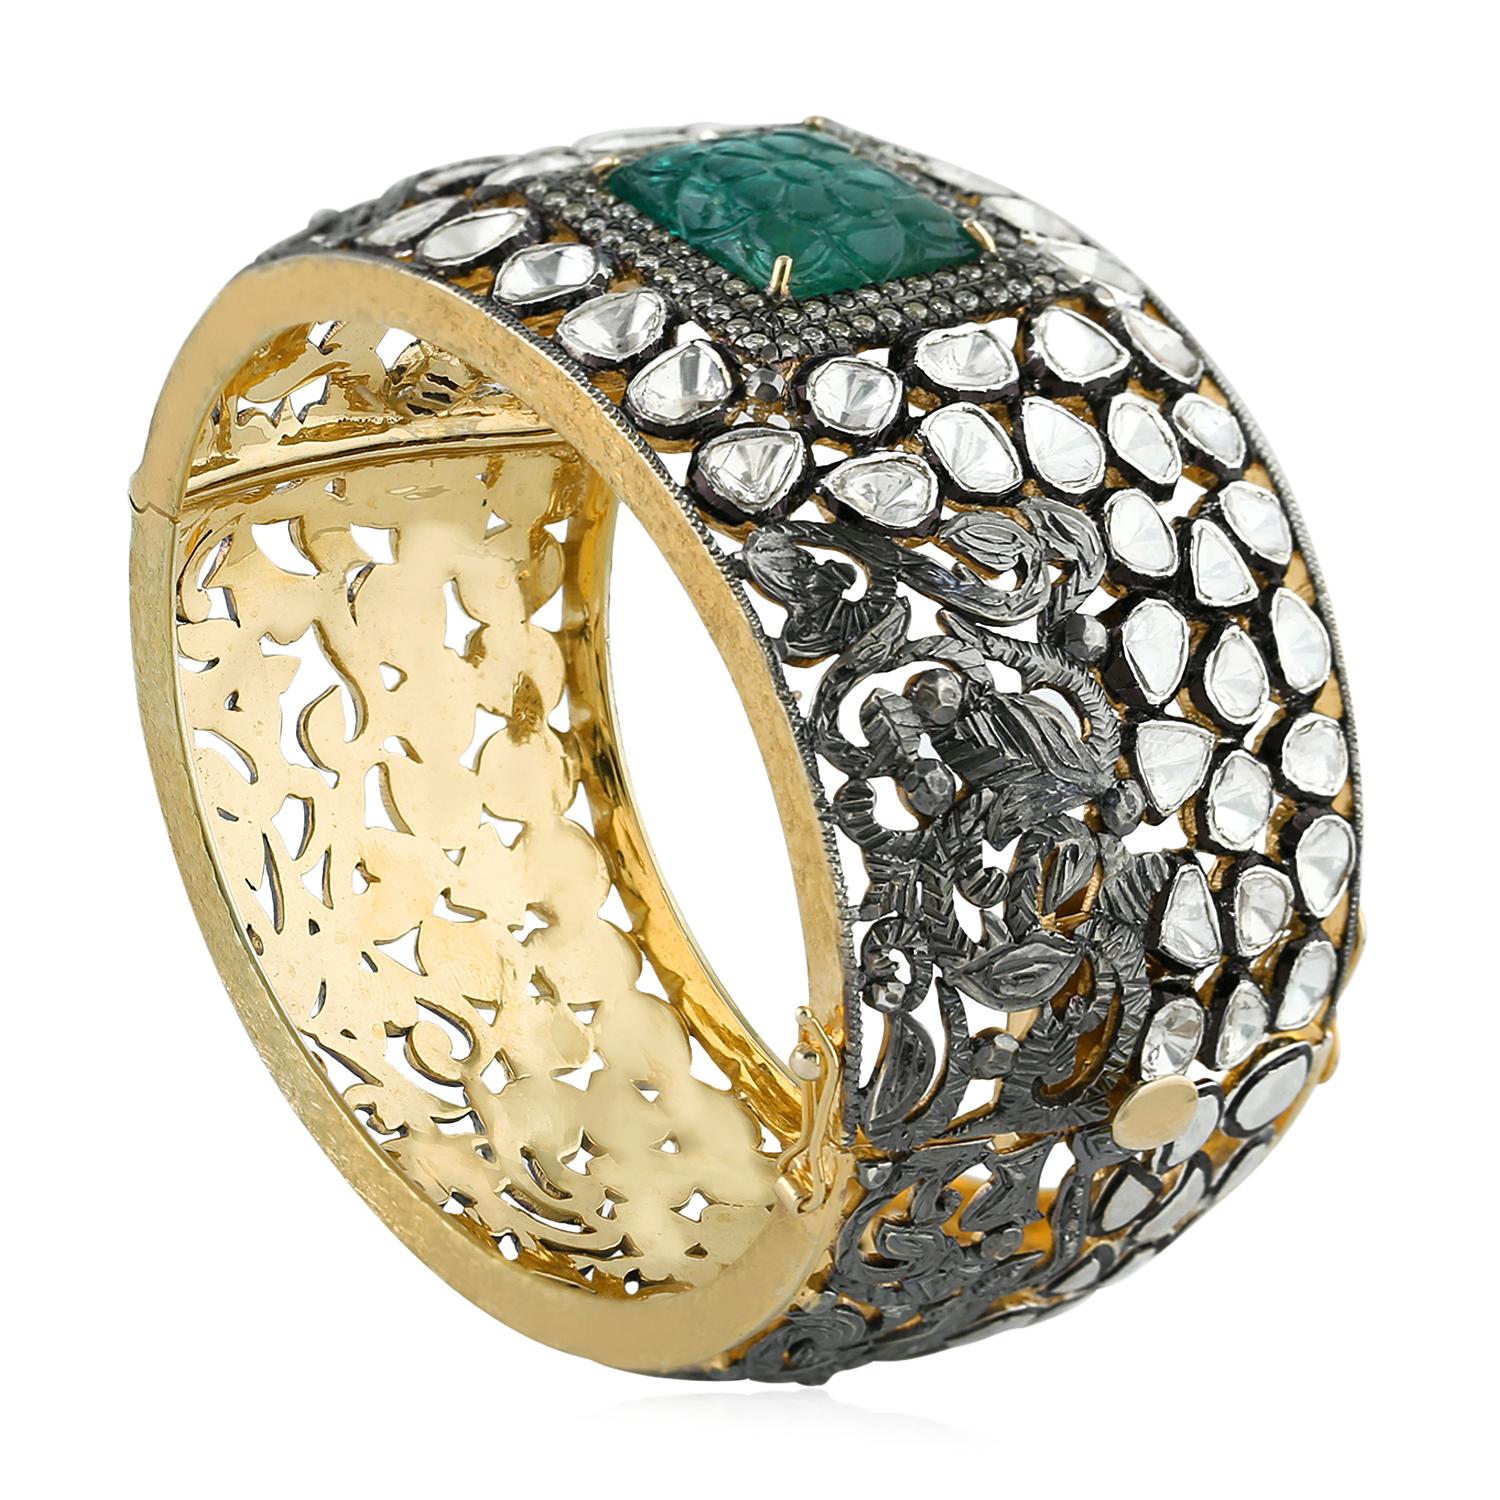 18KT Gold :3.72g,
Diamond:12.64ct
SiIver:55.586g 
Emerald:7.18ct
Size;57X48 MM